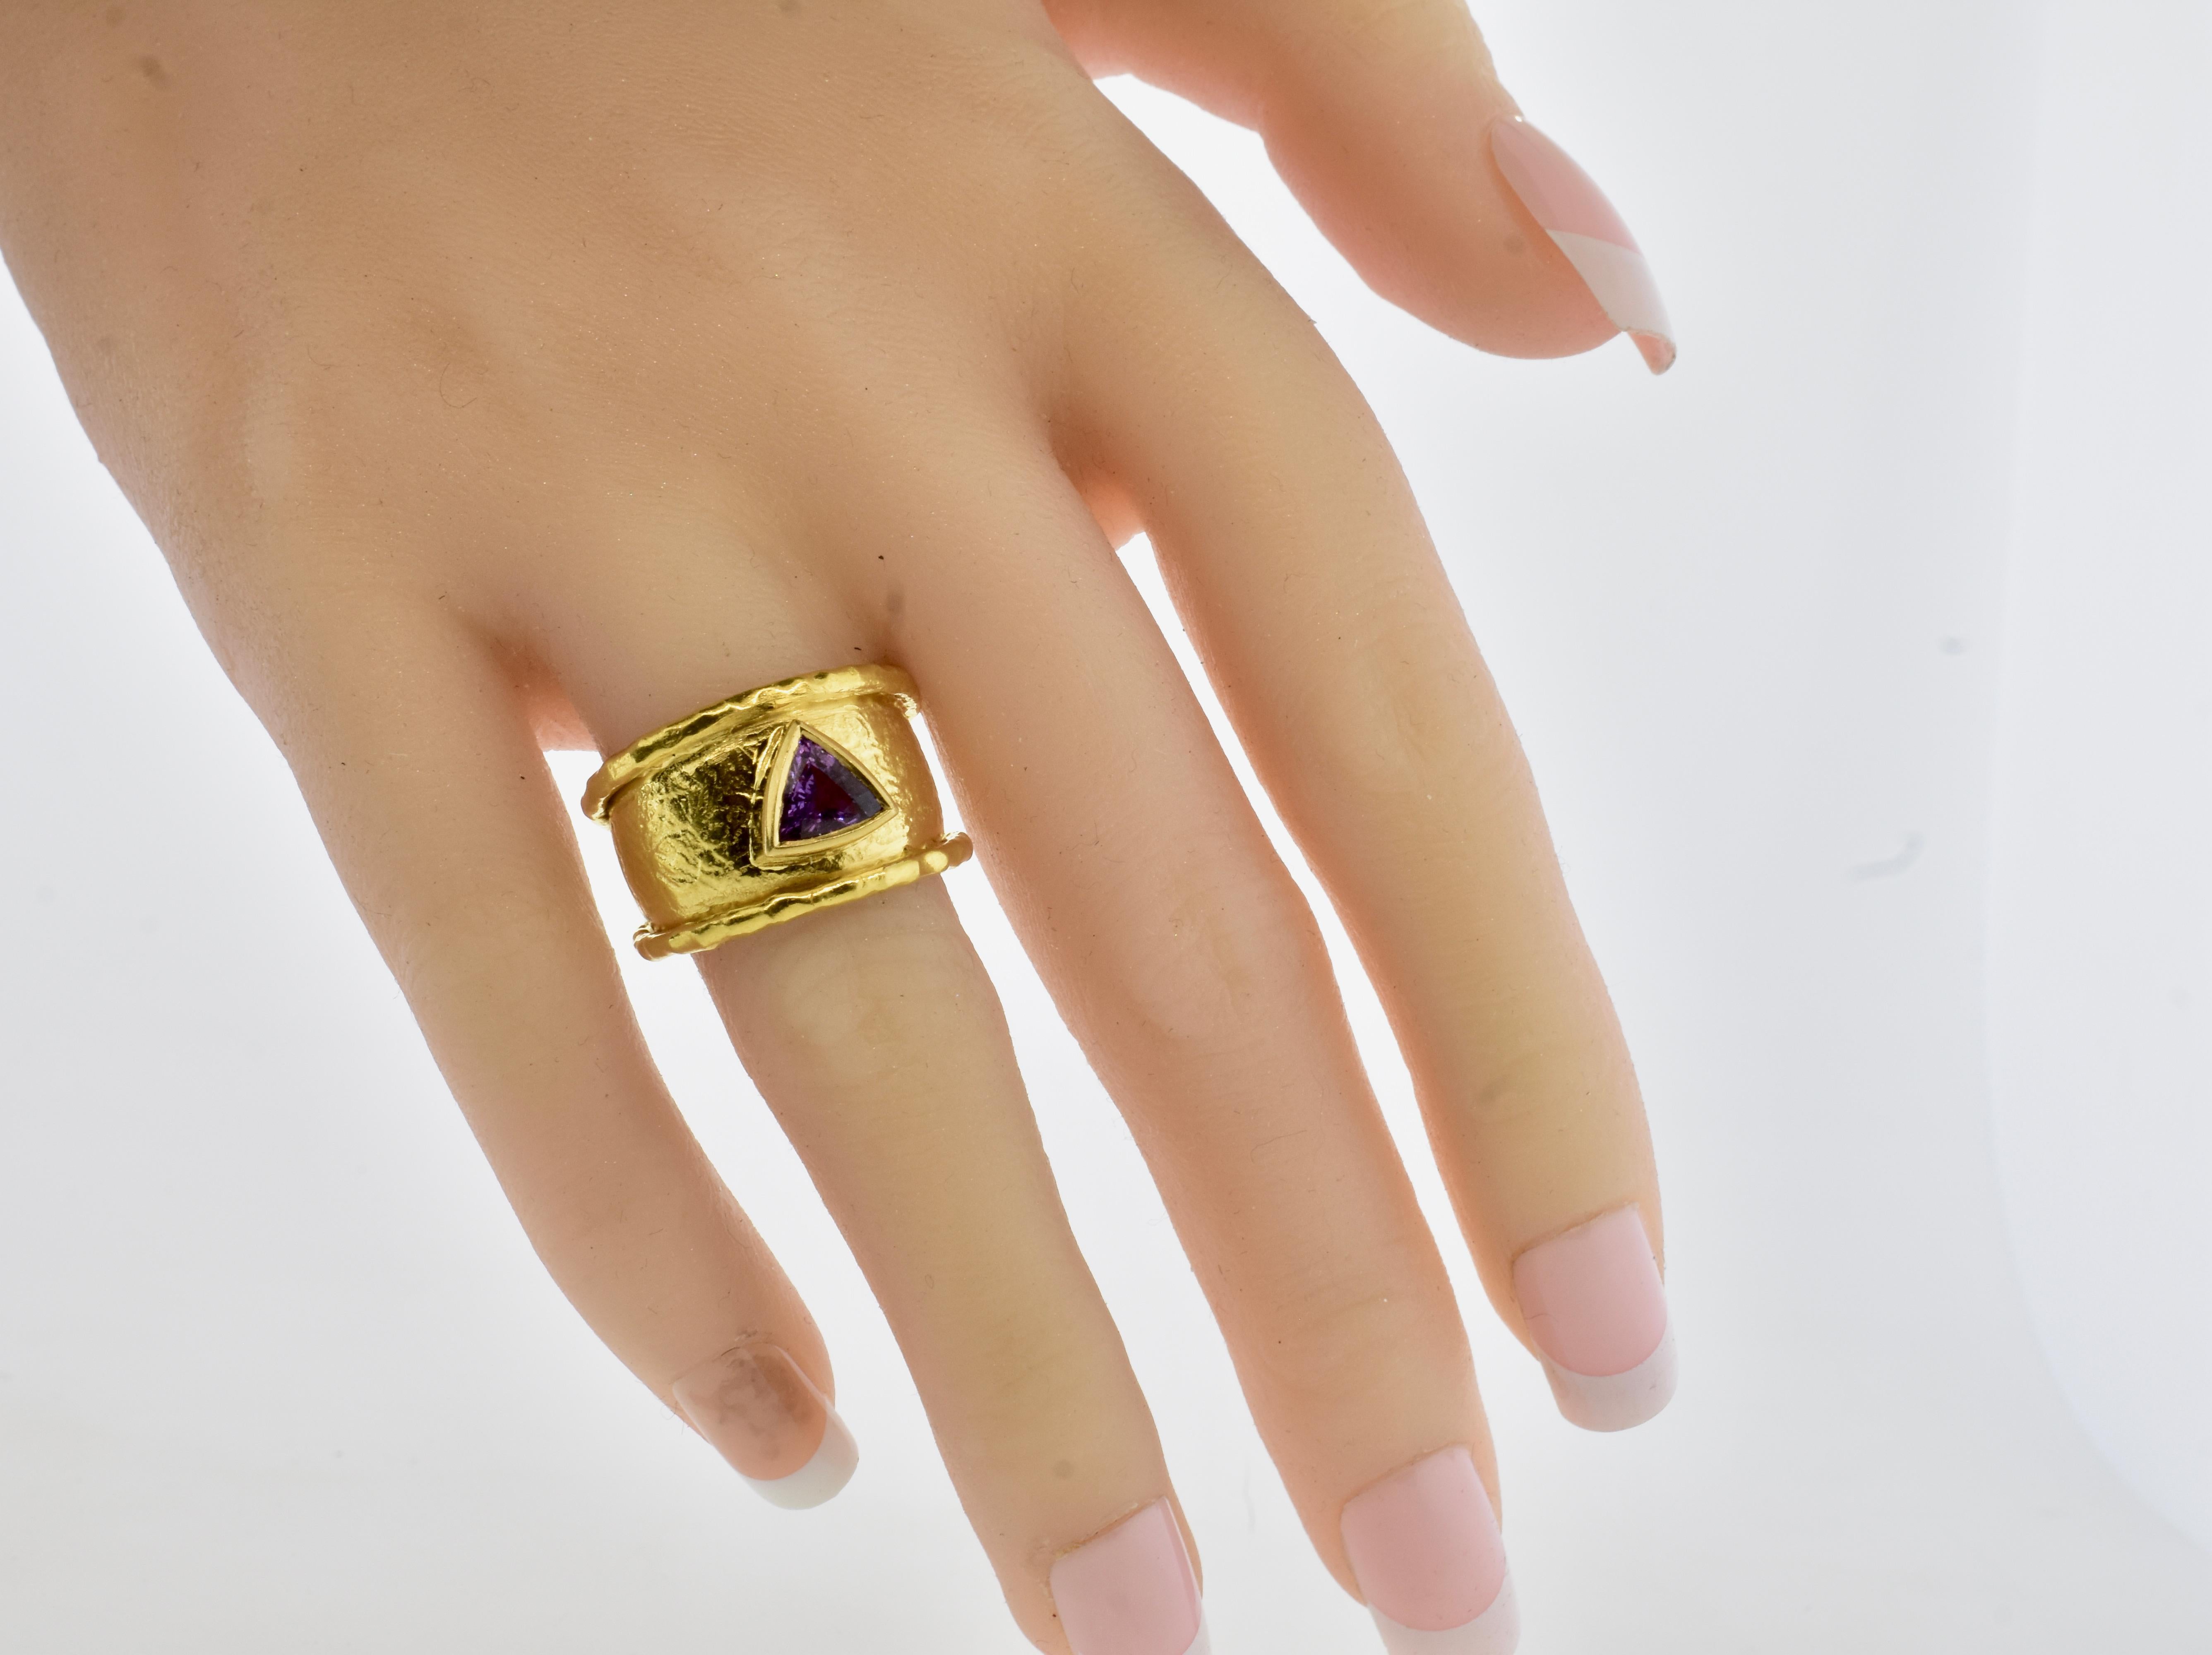 Trapezoid Cut Jean Mahie Gold and Fancy Cut Fine Purple Sapphire Ring, French,  c. 1990